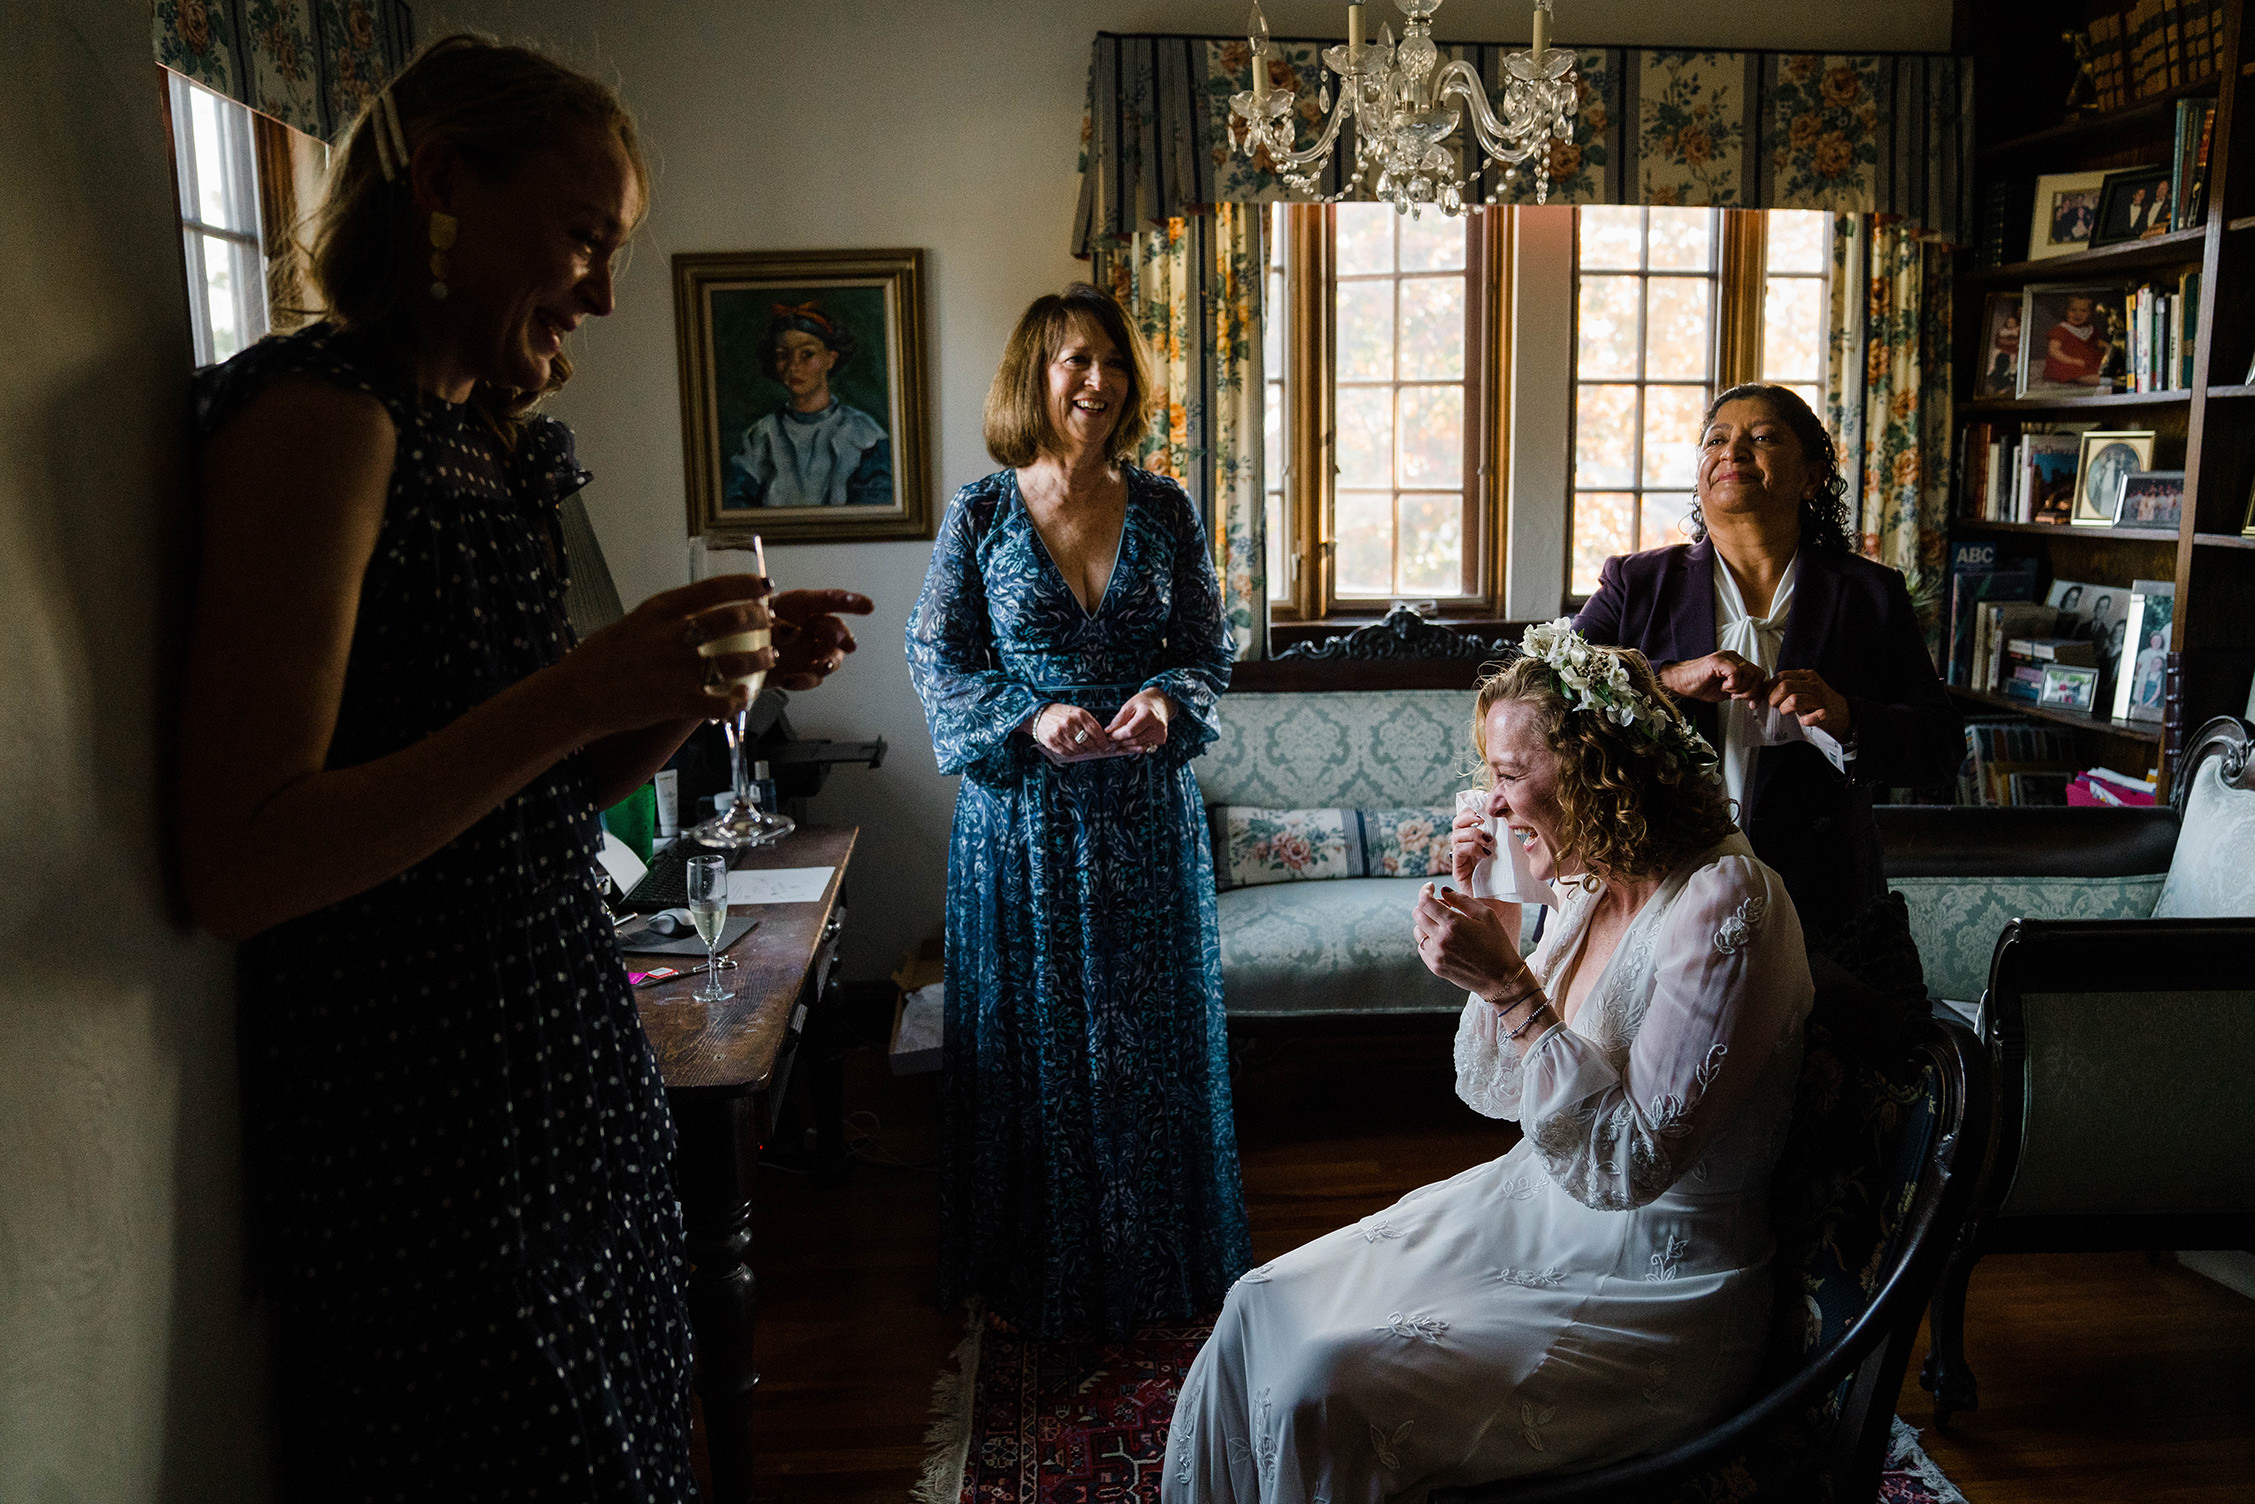 A documentary photograph featured in the best of wedding photography of 2019 showing a bride crying and laughing while getting ready at home with family and friends